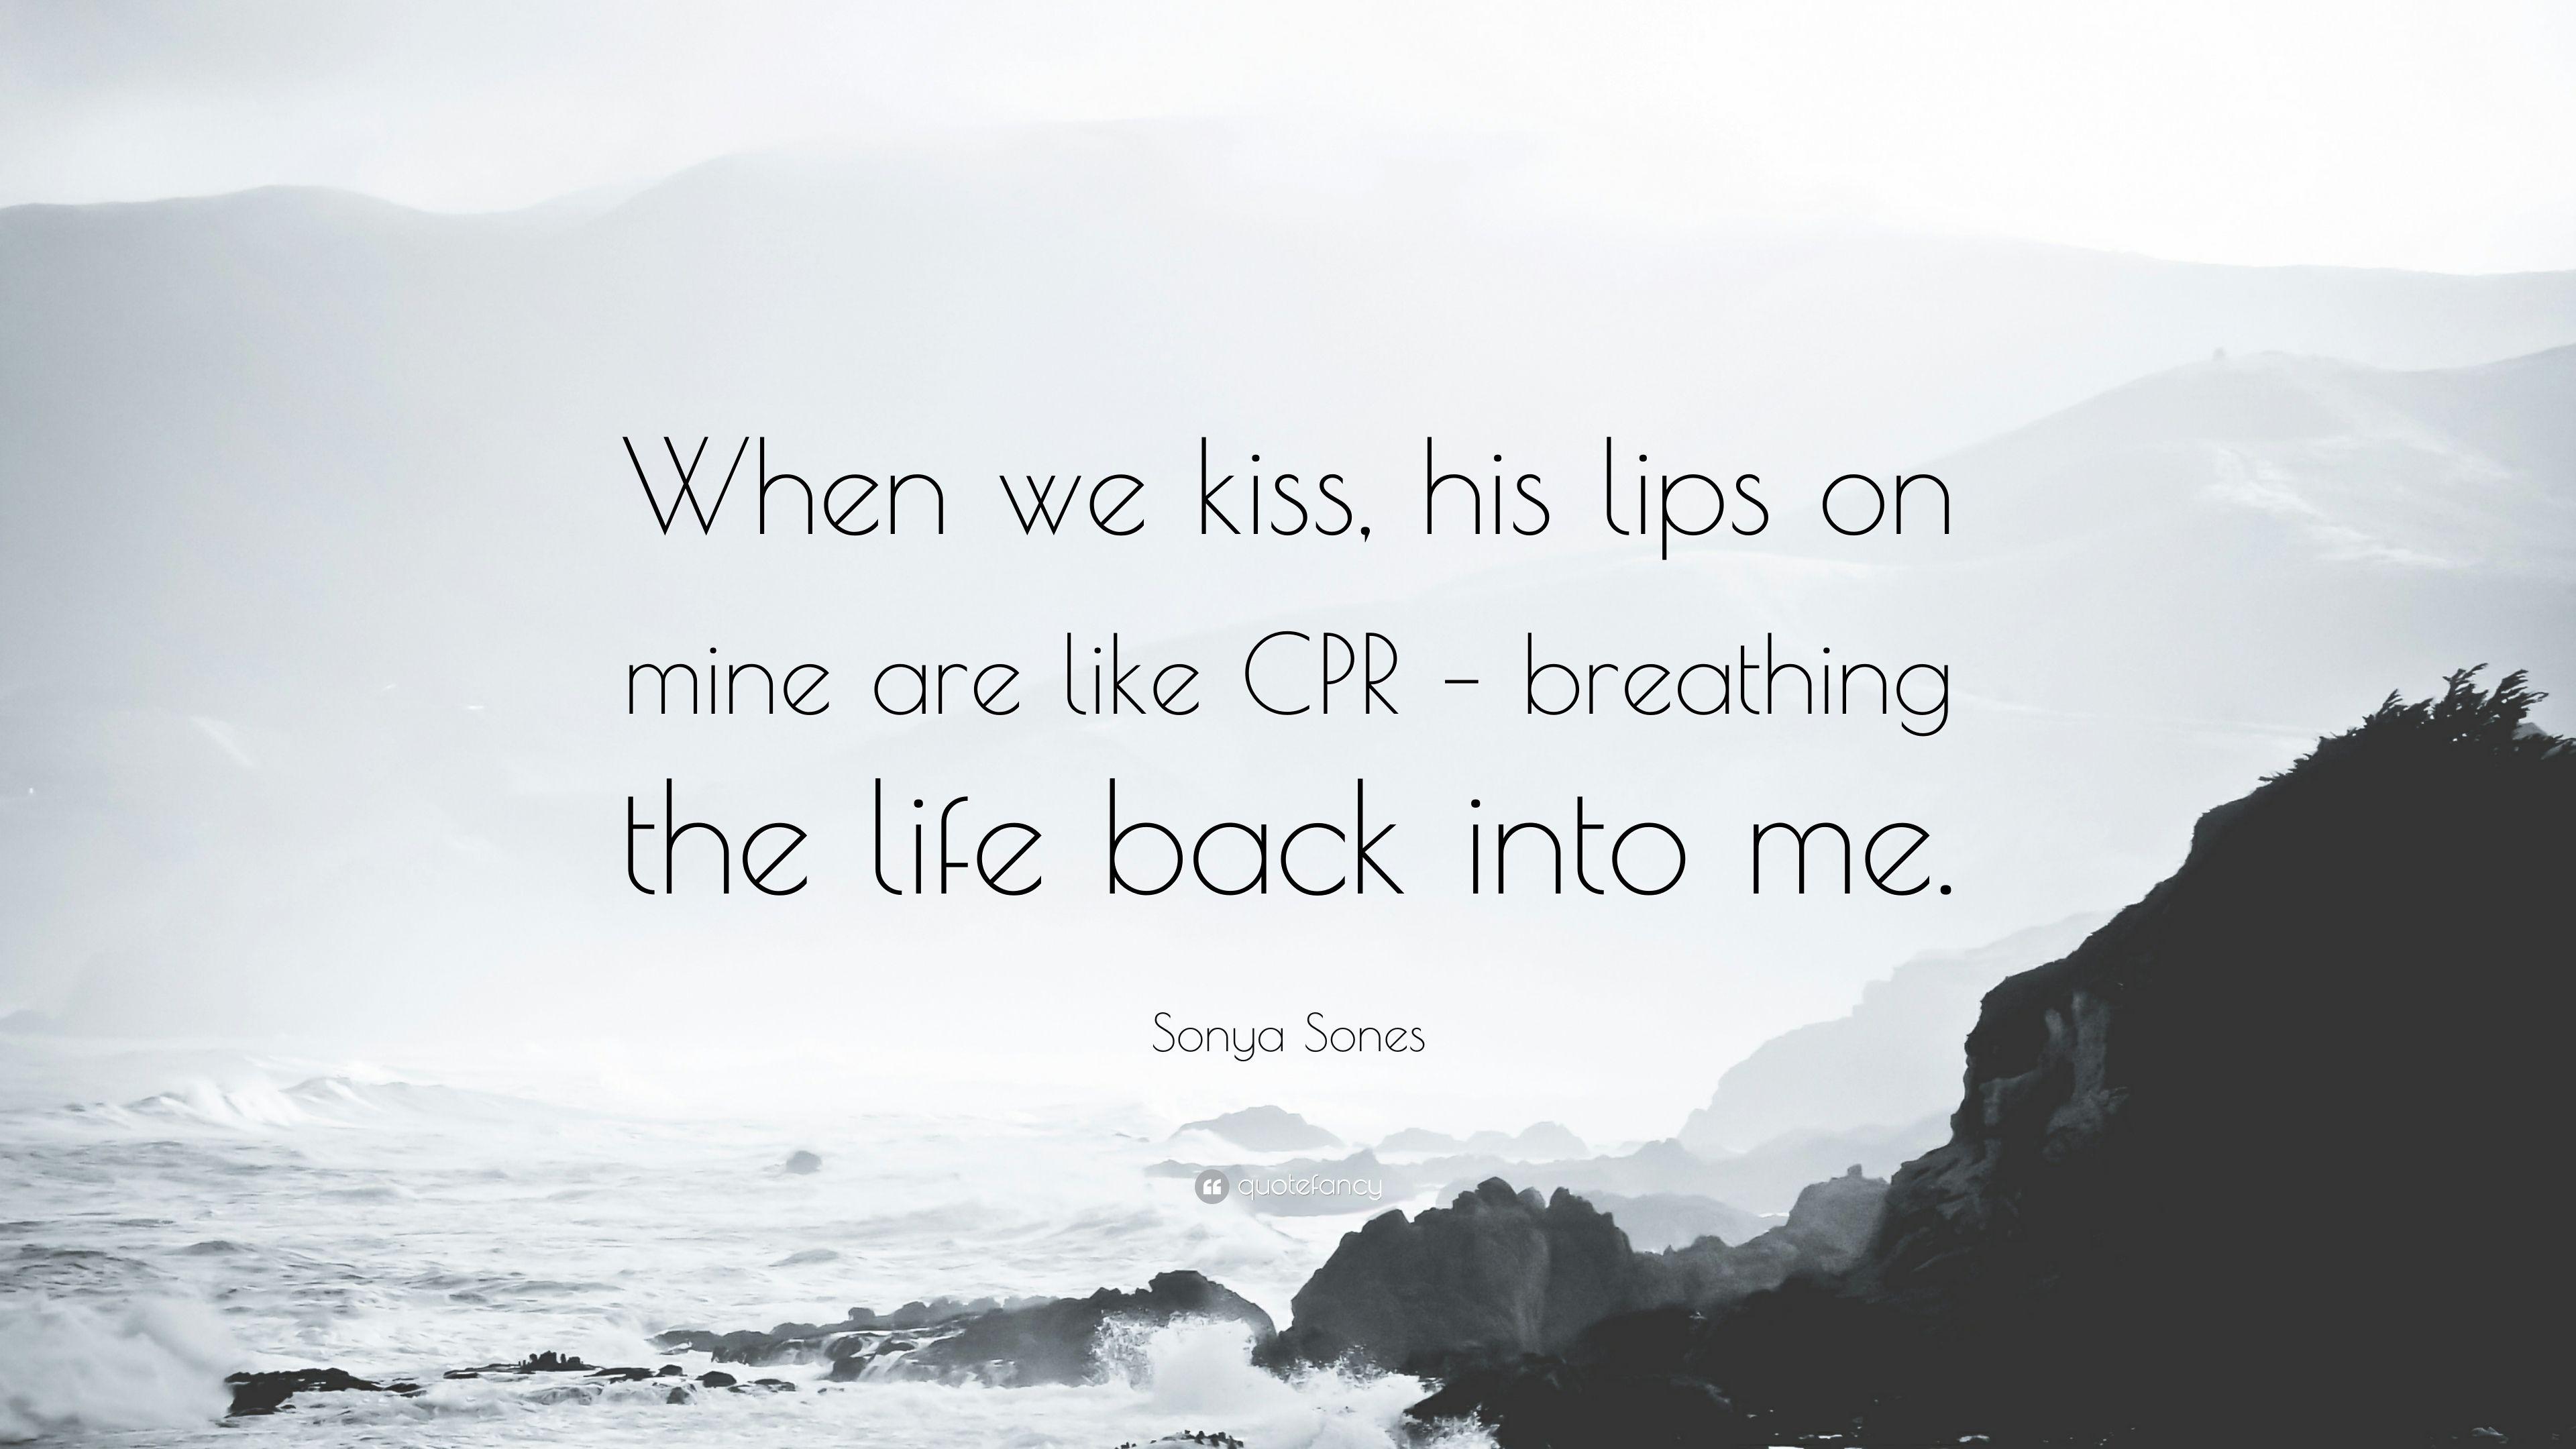 Sonya Sones Quote: “When we kiss, his lips on mine are like CPR